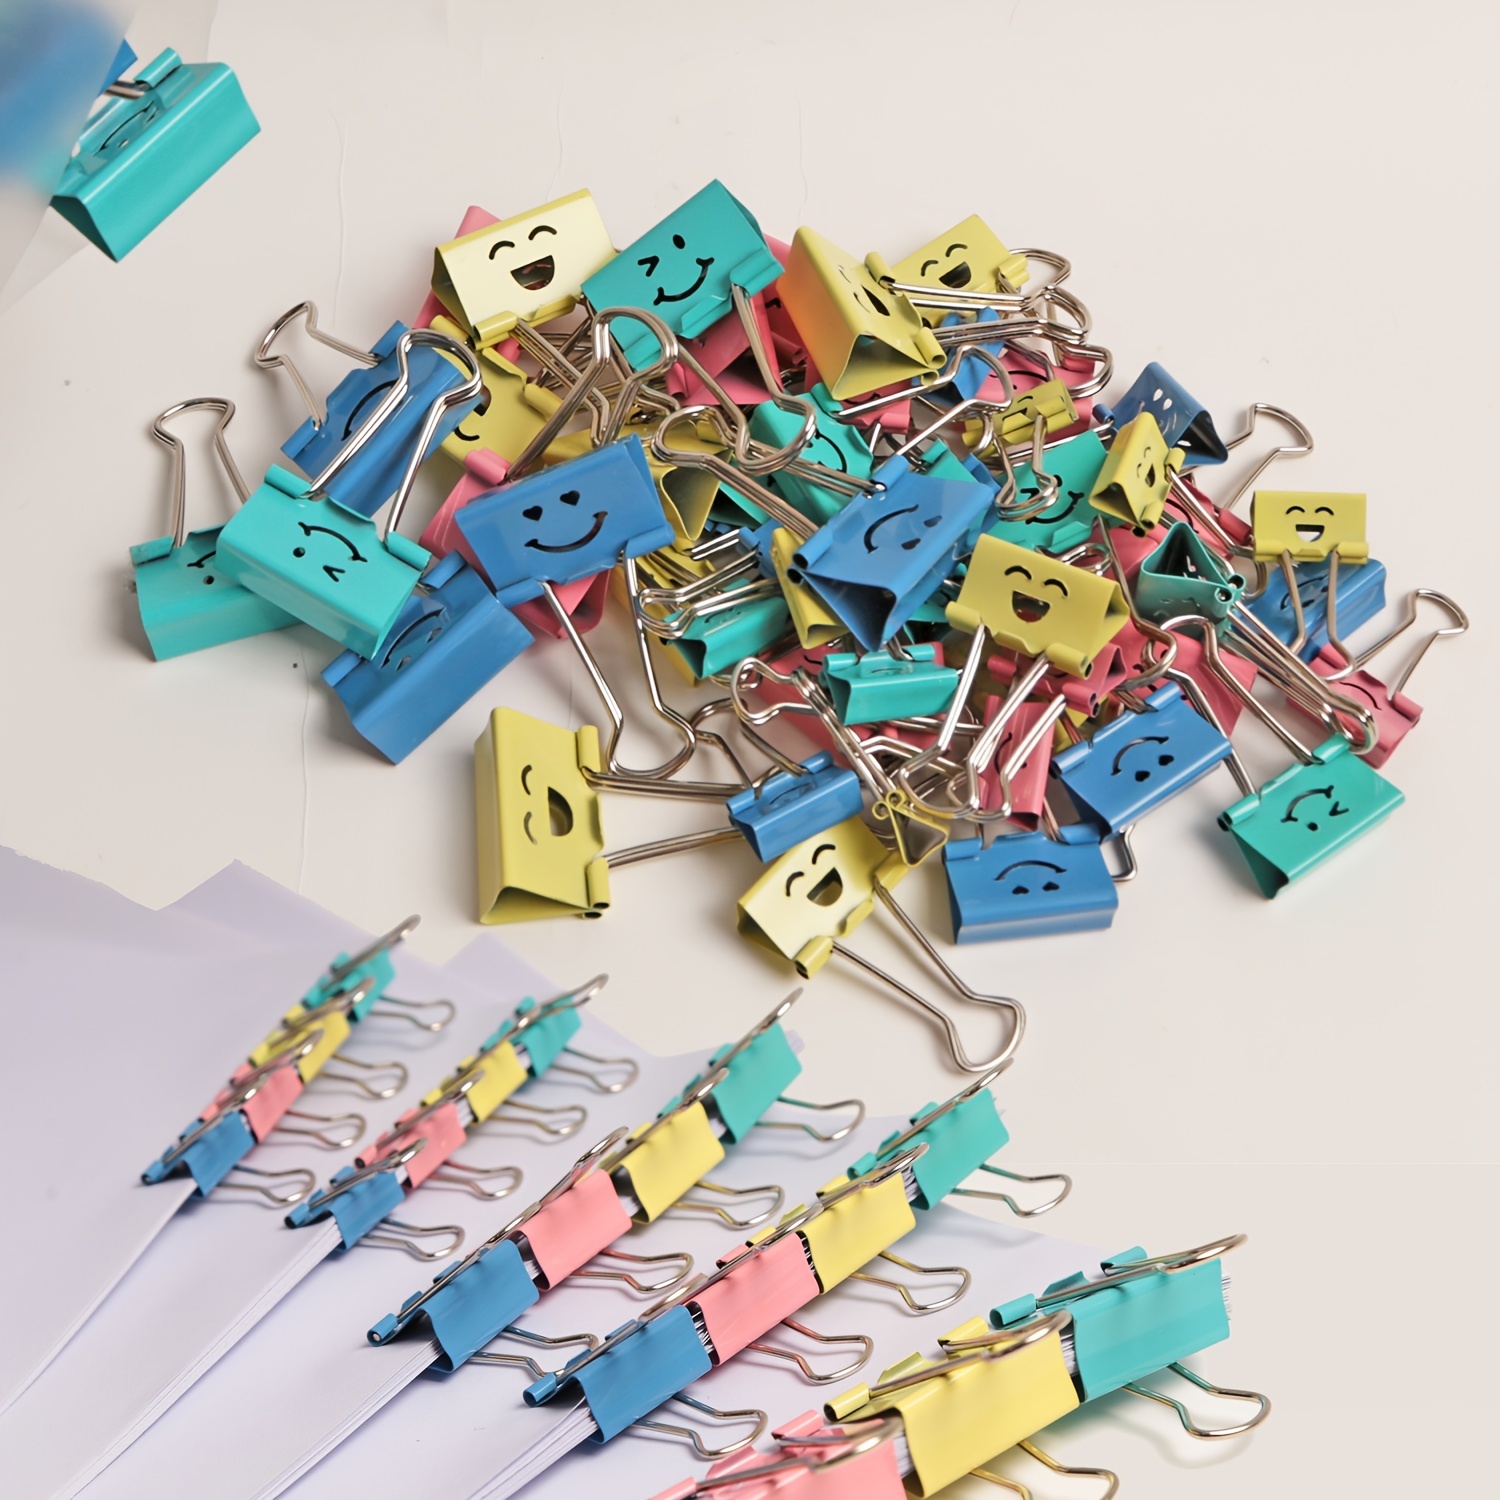 

20pcs Happy Face Hollow Dovetail Clips, 19mm/25mm/32mm Etc Assorted Sizes Colorful Metal Binder Clips, Can Be Used For Office, Teacher Gifts, Kitchen Clips, Add Funny Stationery Collection